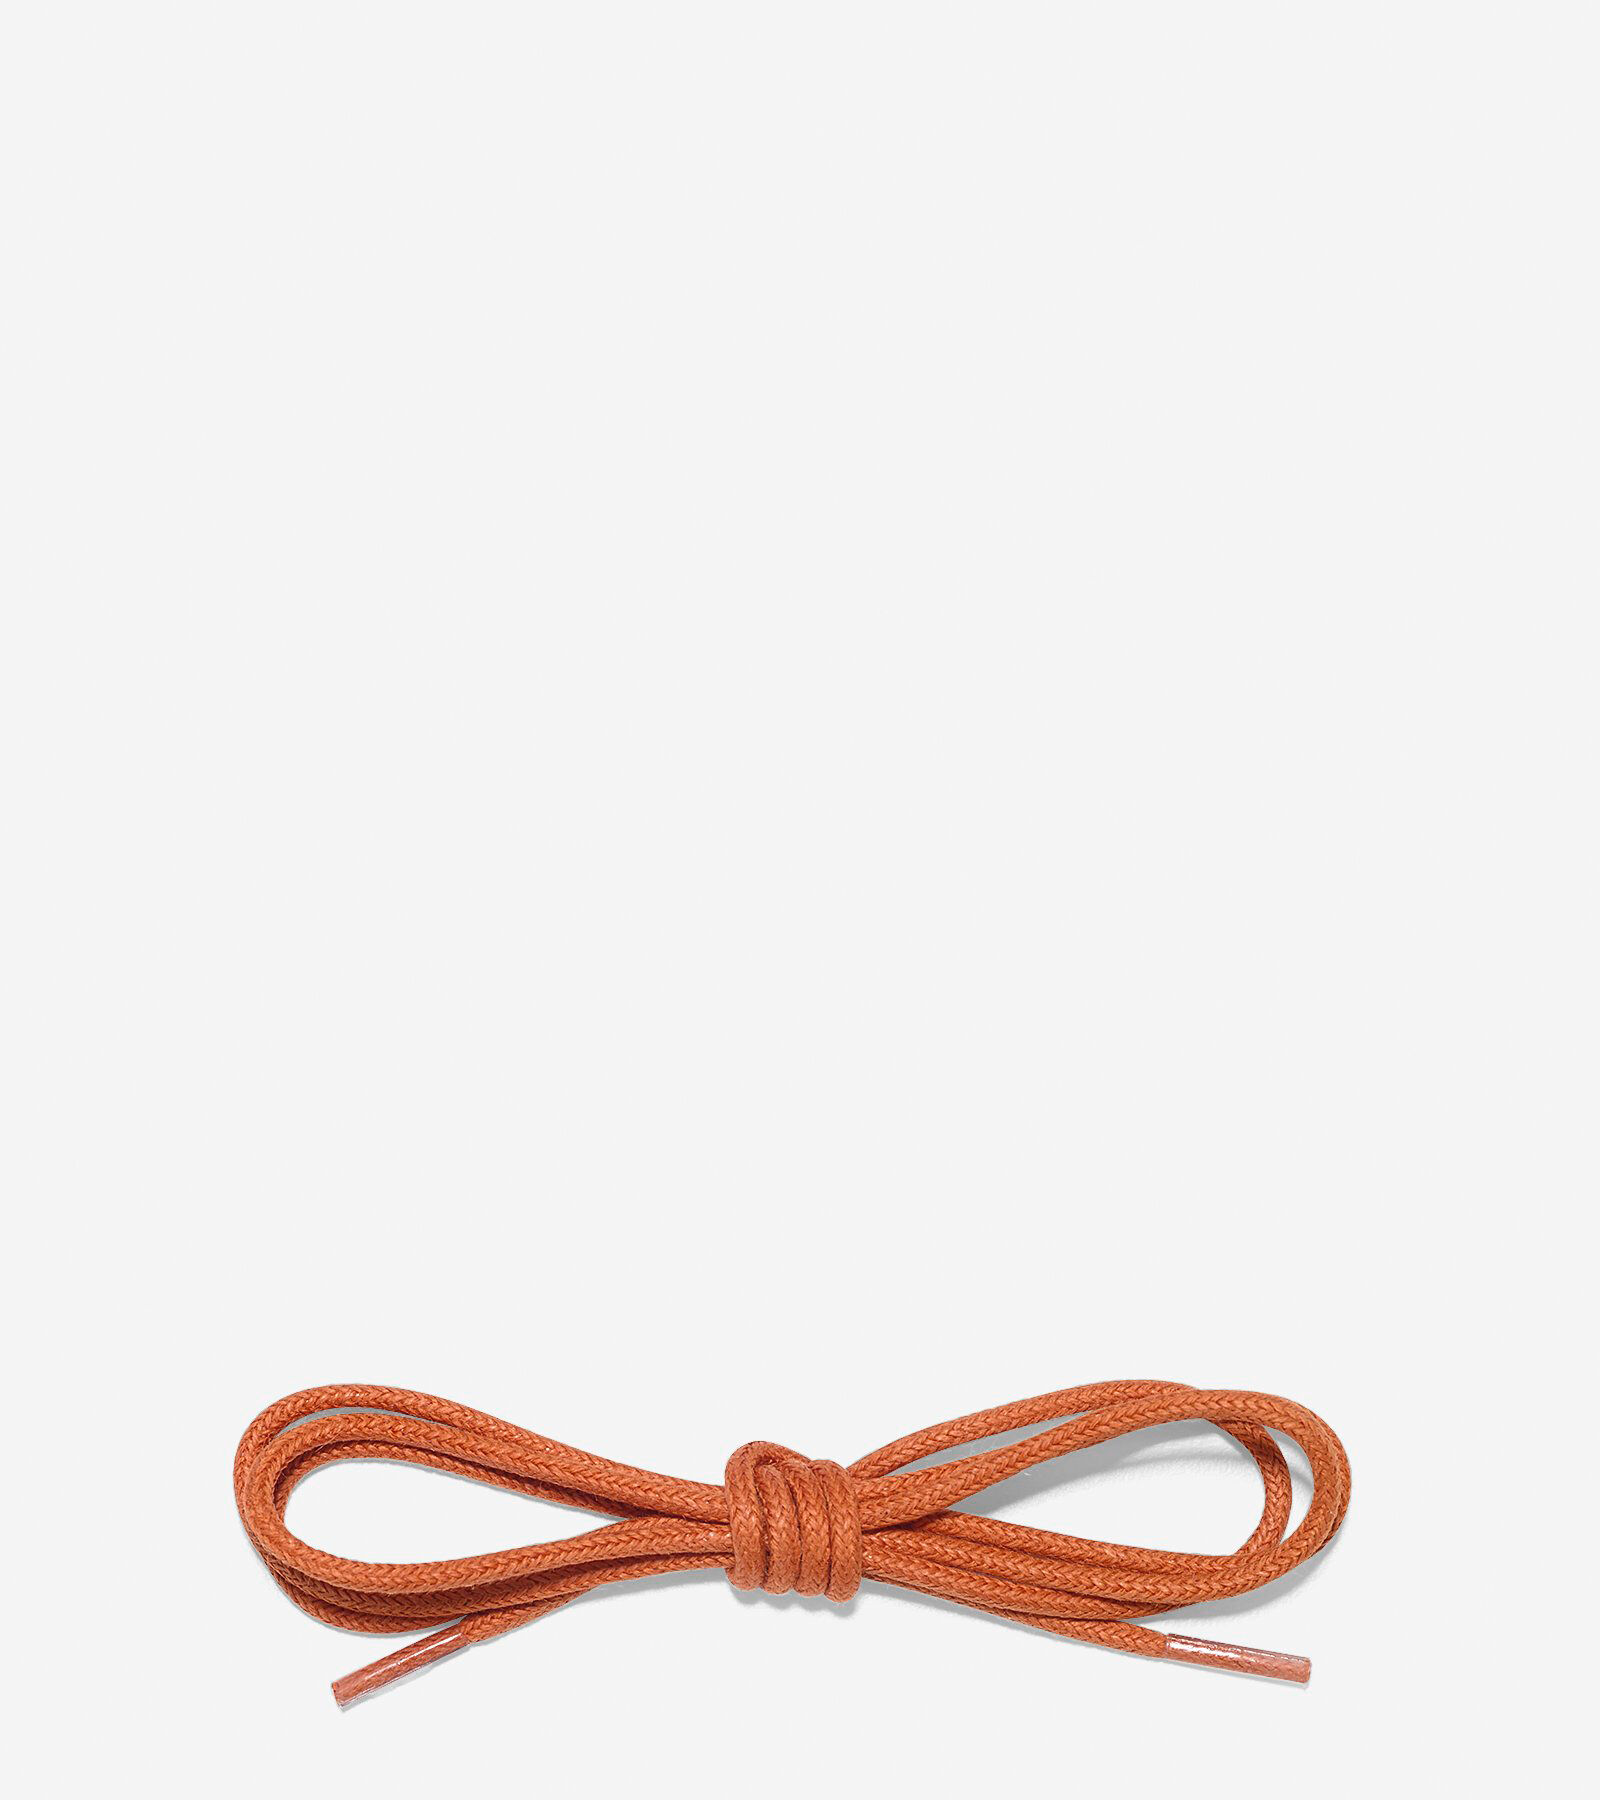 Where to Buy Cole Haan Shoe Laces?